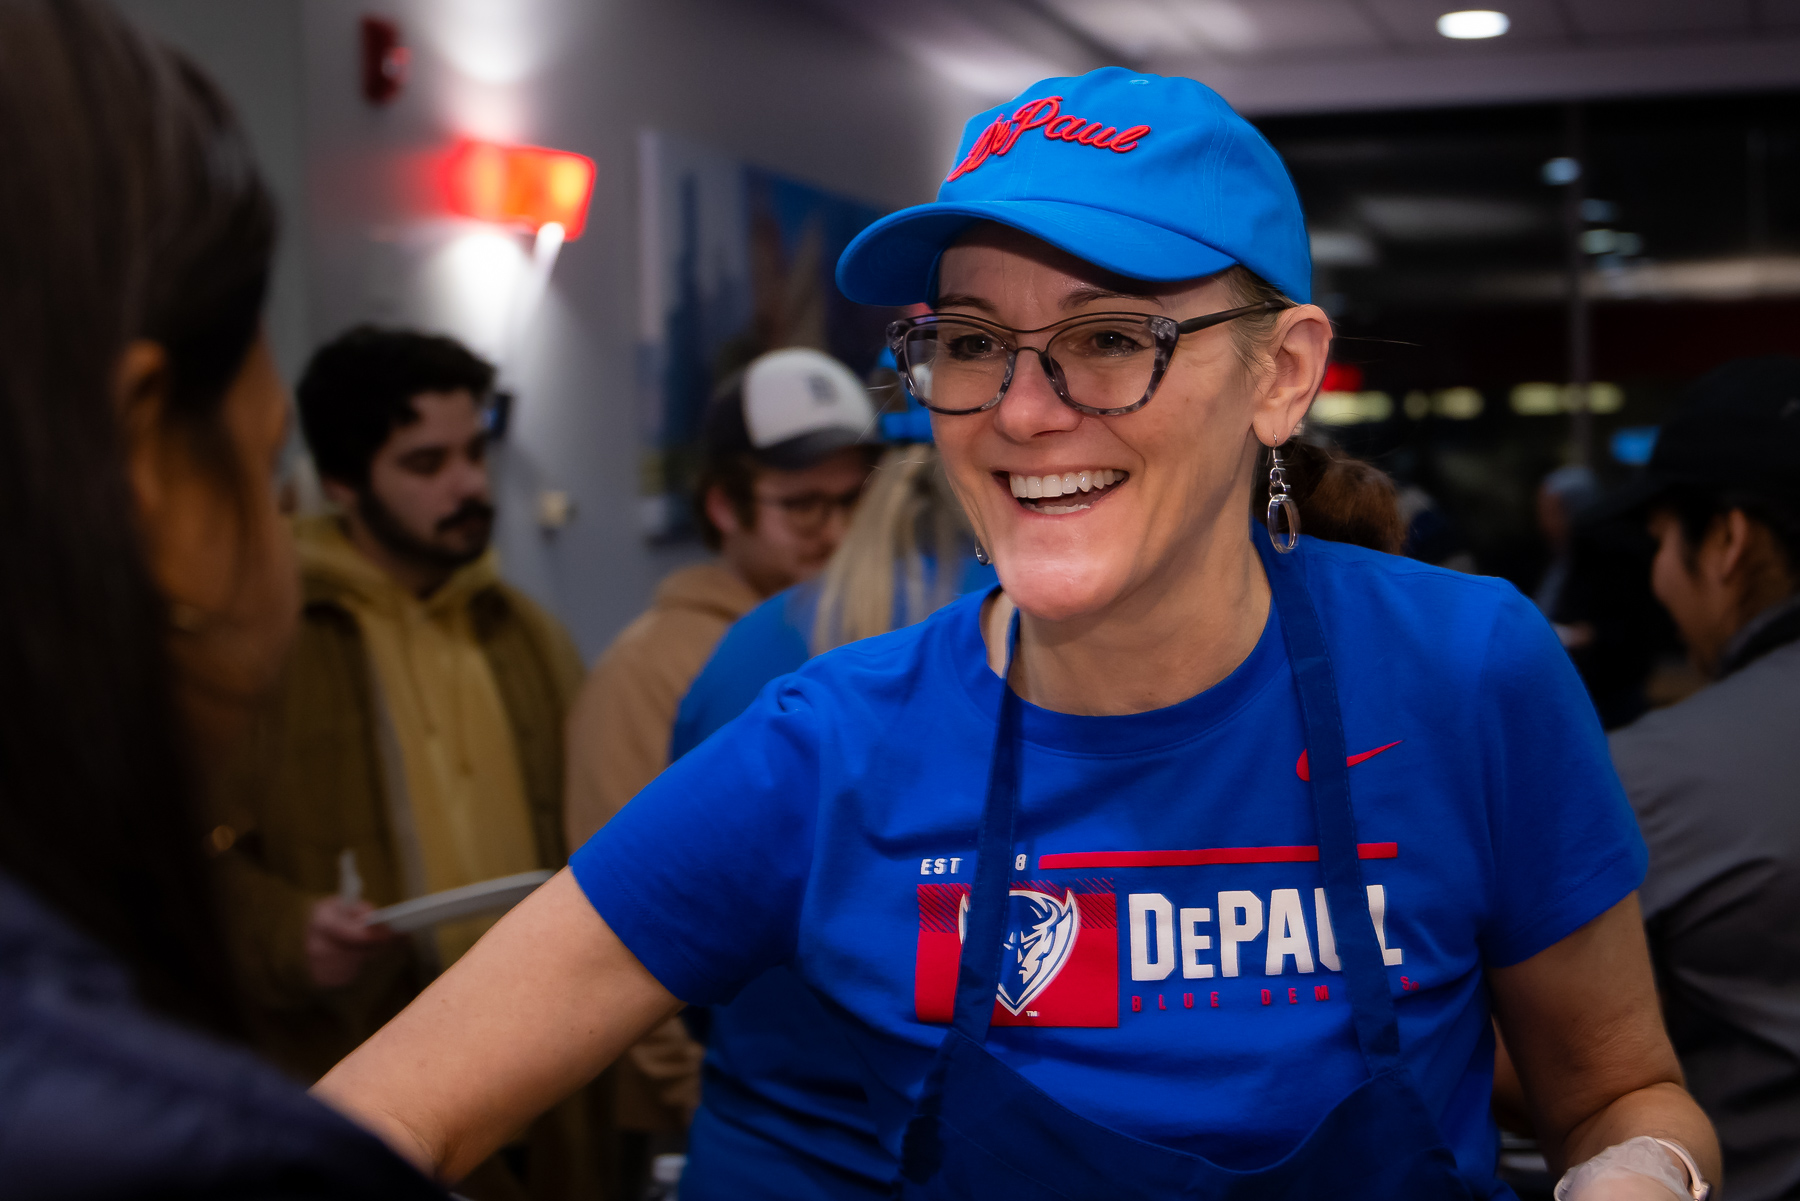 College of Education Dean Jennifer Mueller had a blast at her first Finals Breakfast. (Photo by Jeff Carrion / DePaul University) 